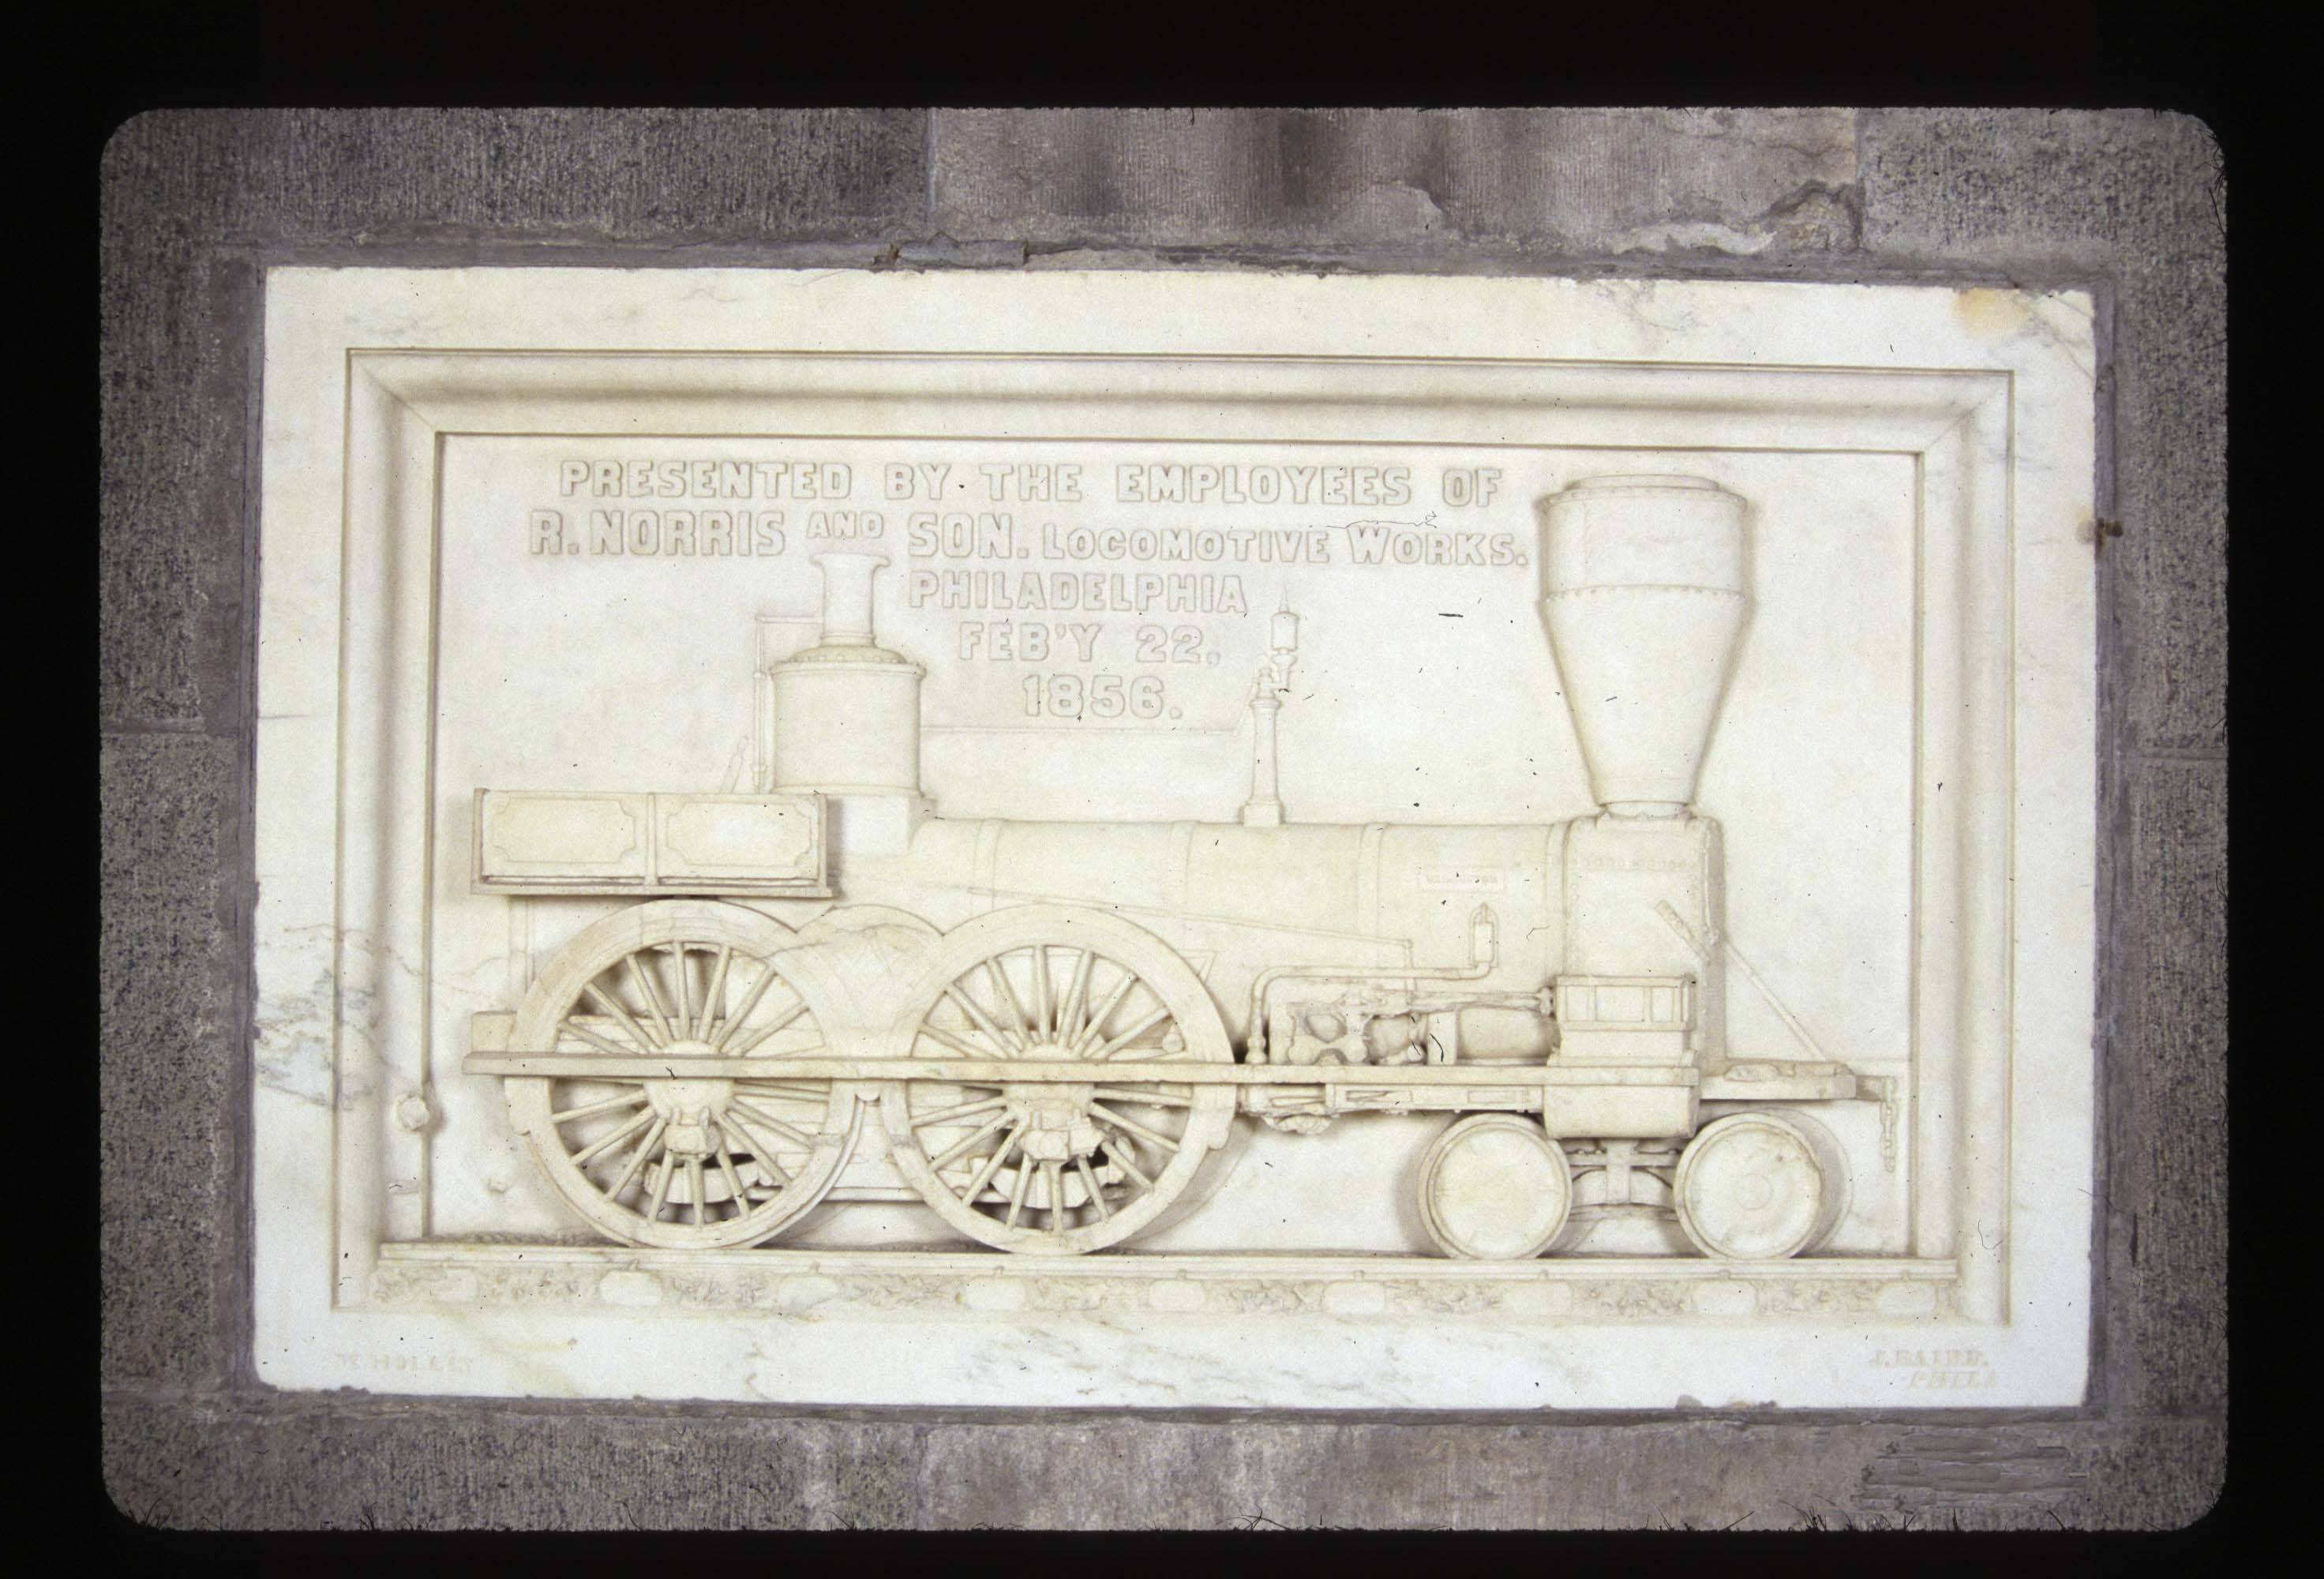 R. Norris and Son Locomotive Works